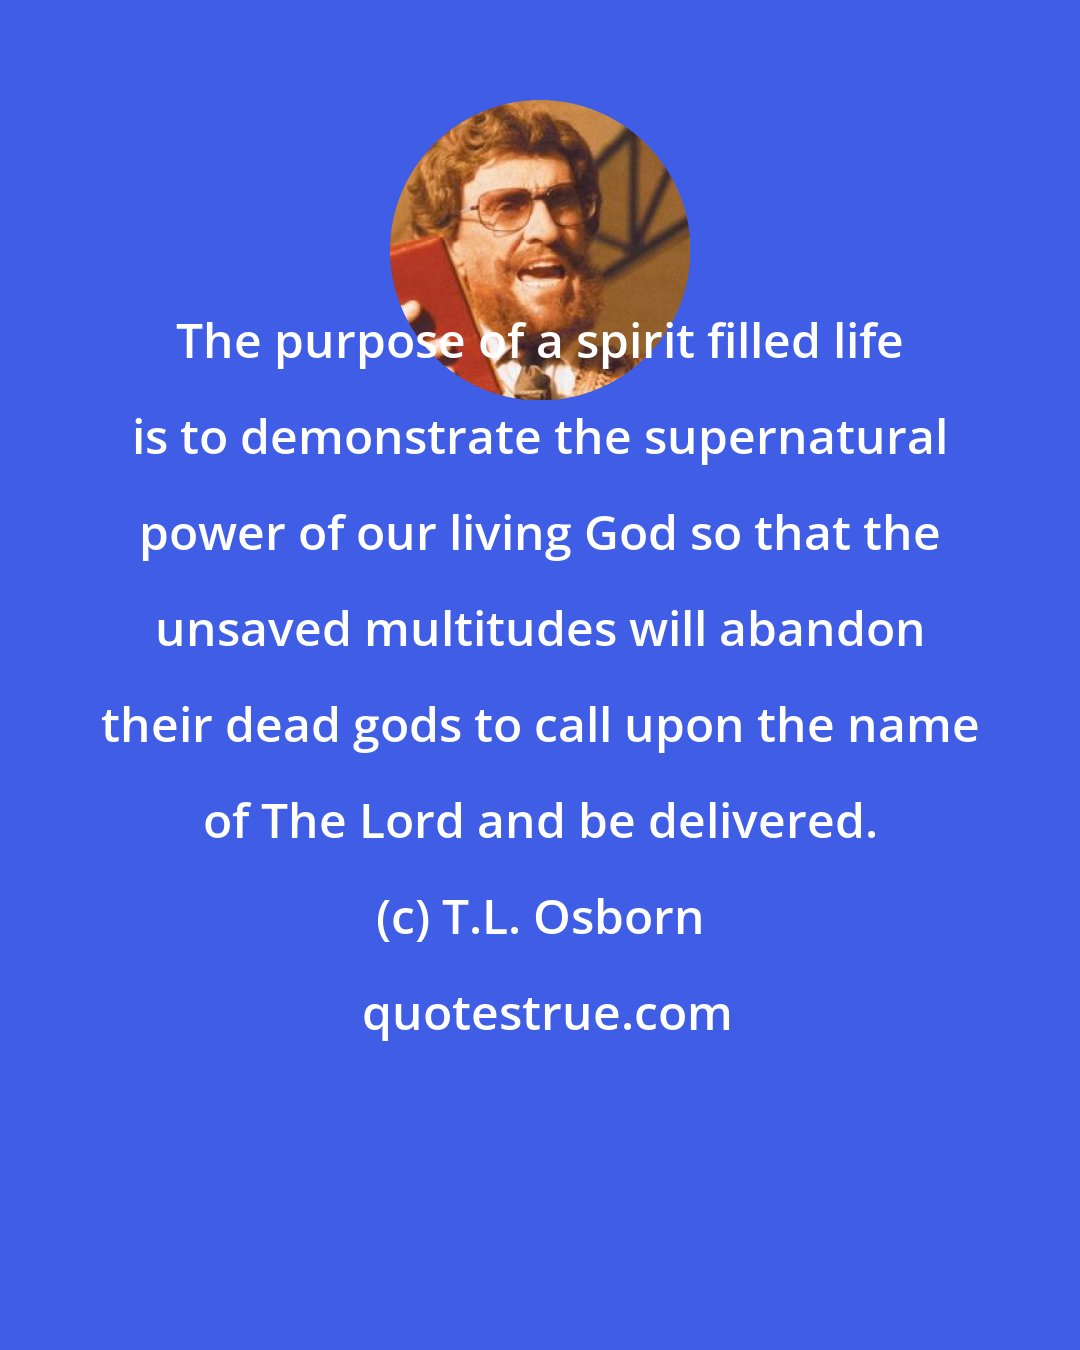 T.L. Osborn: The purpose of a spirit filled life is to demonstrate the supernatural power of our living God so that the unsaved multitudes will abandon their dead gods to call upon the name of The Lord and be delivered.